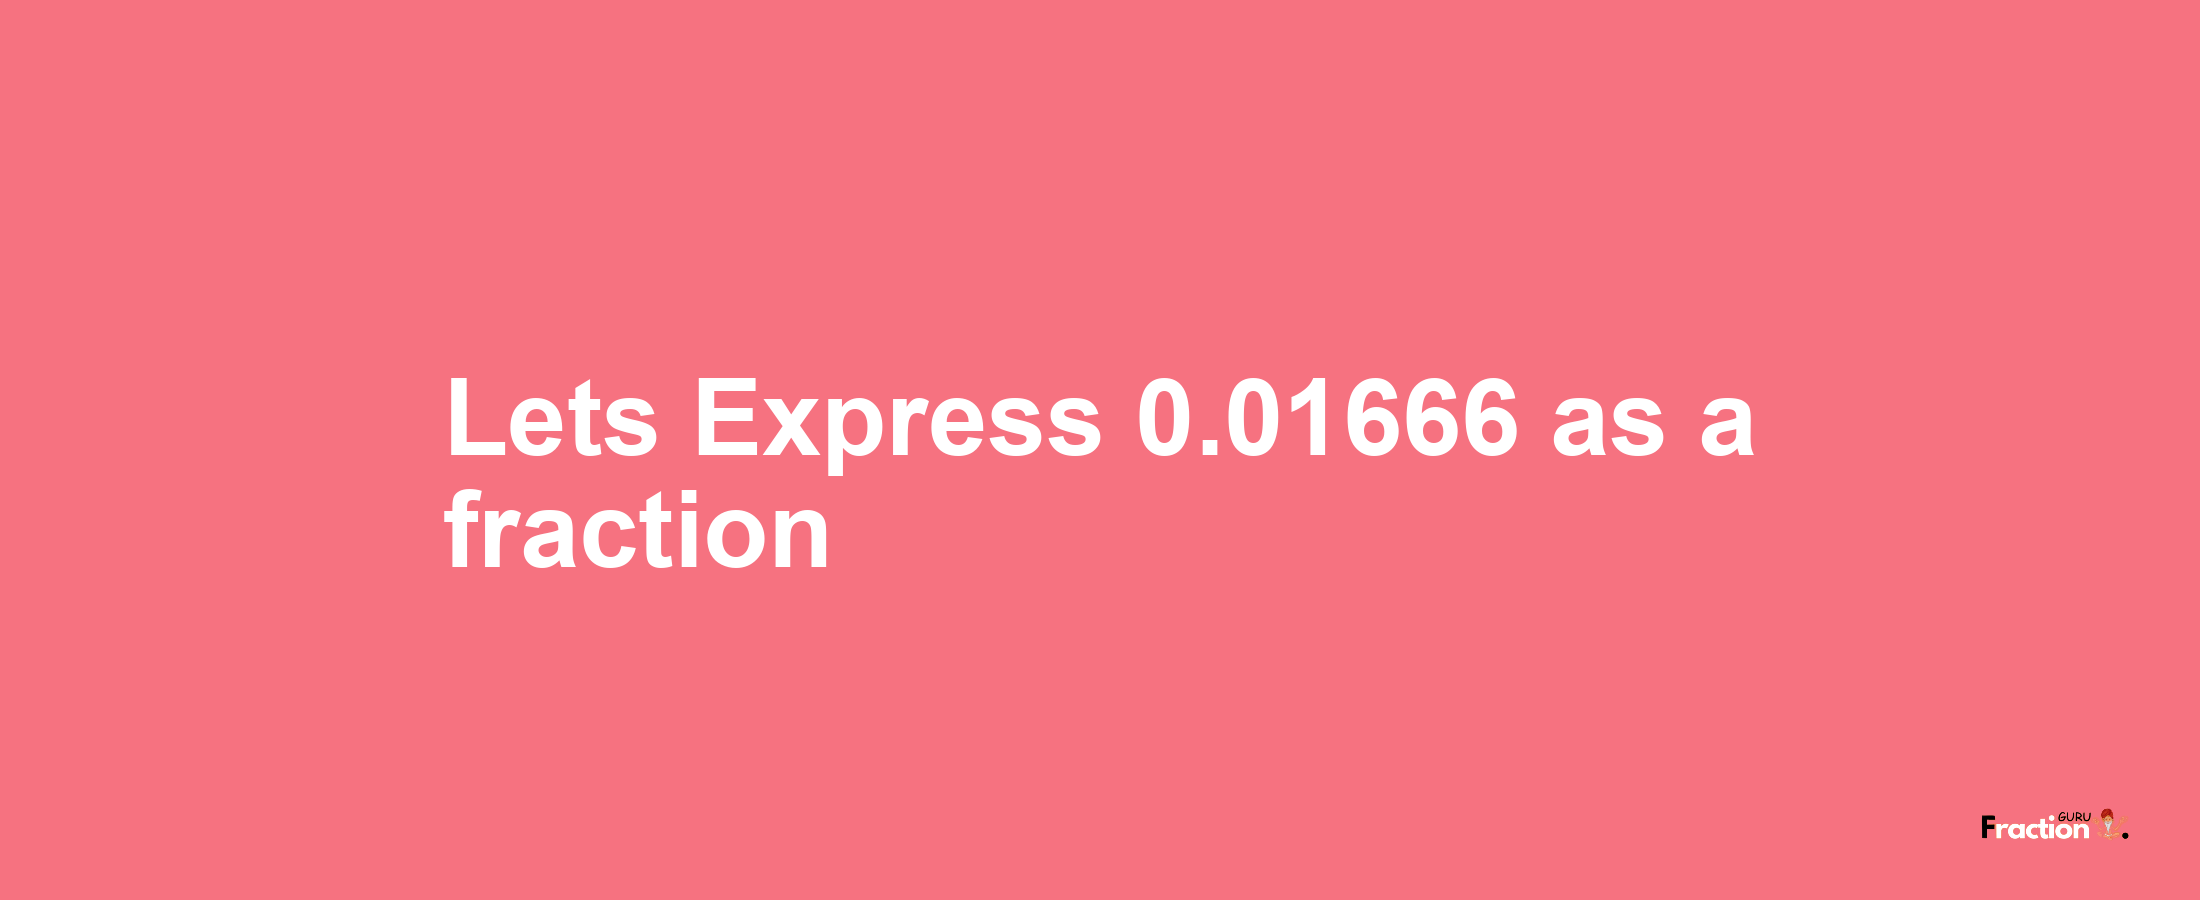 Lets Express 0.01666 as afraction